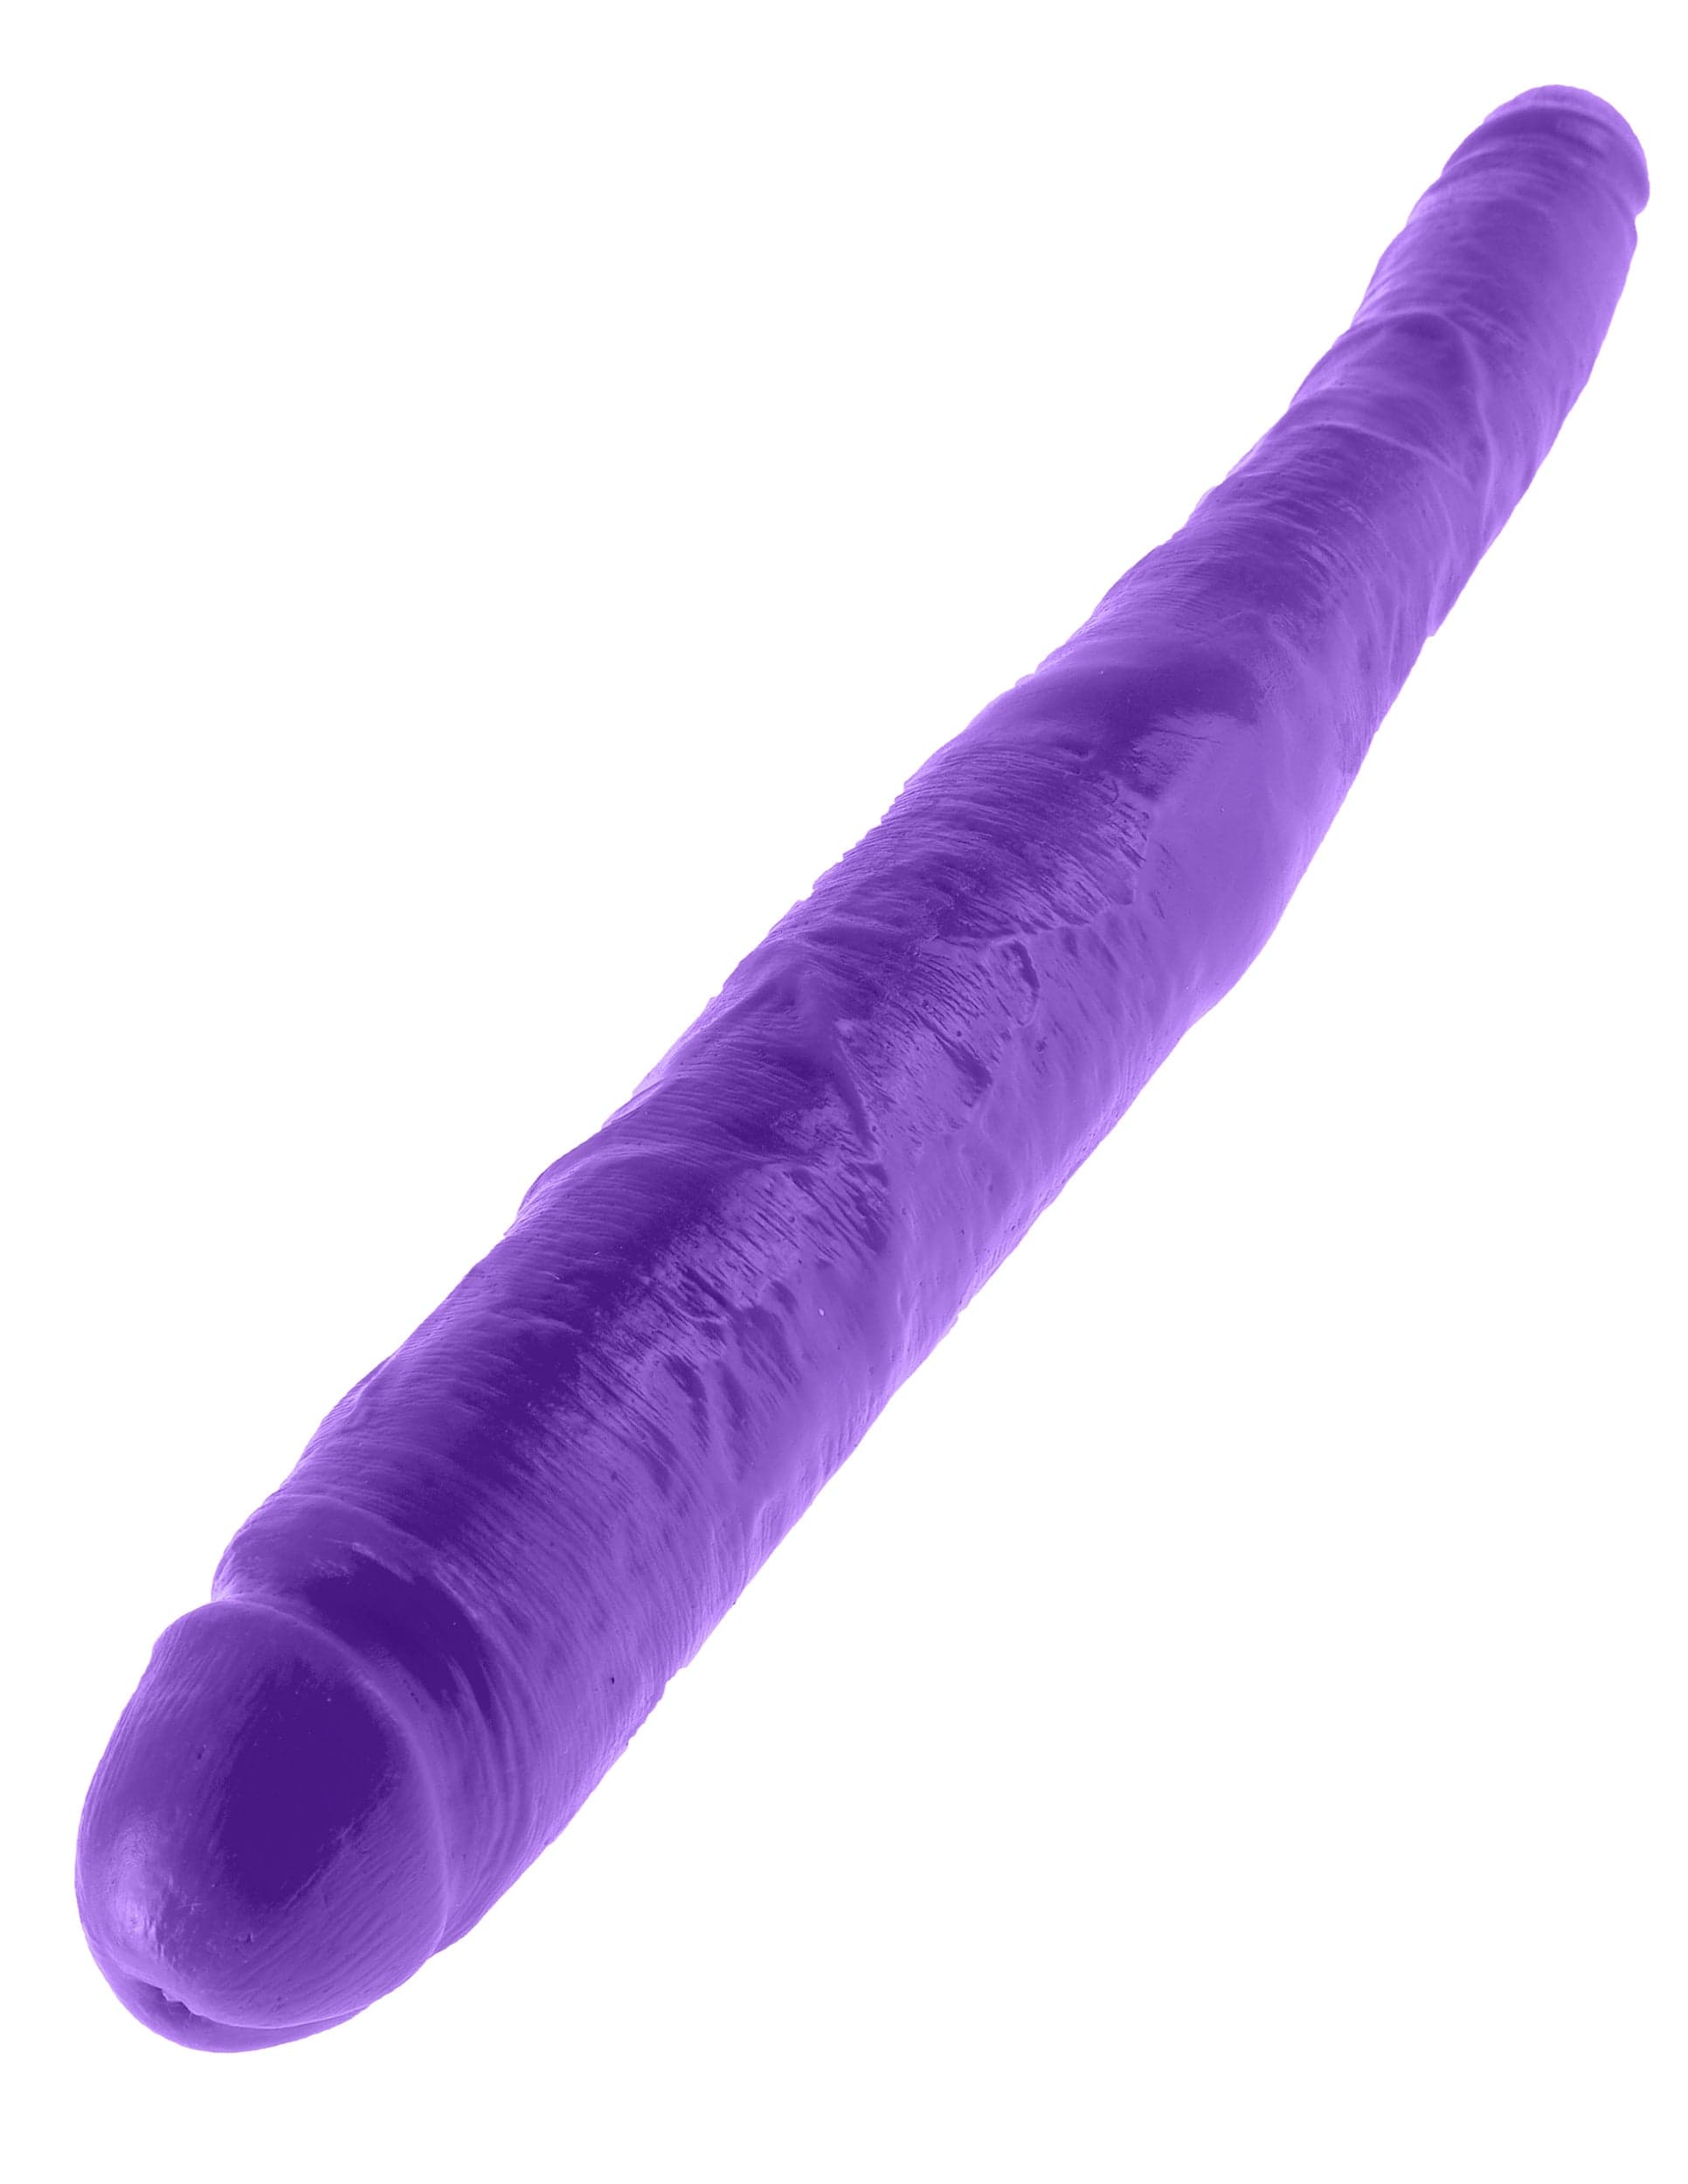 DOUBLE DONG 16" - PURPLE